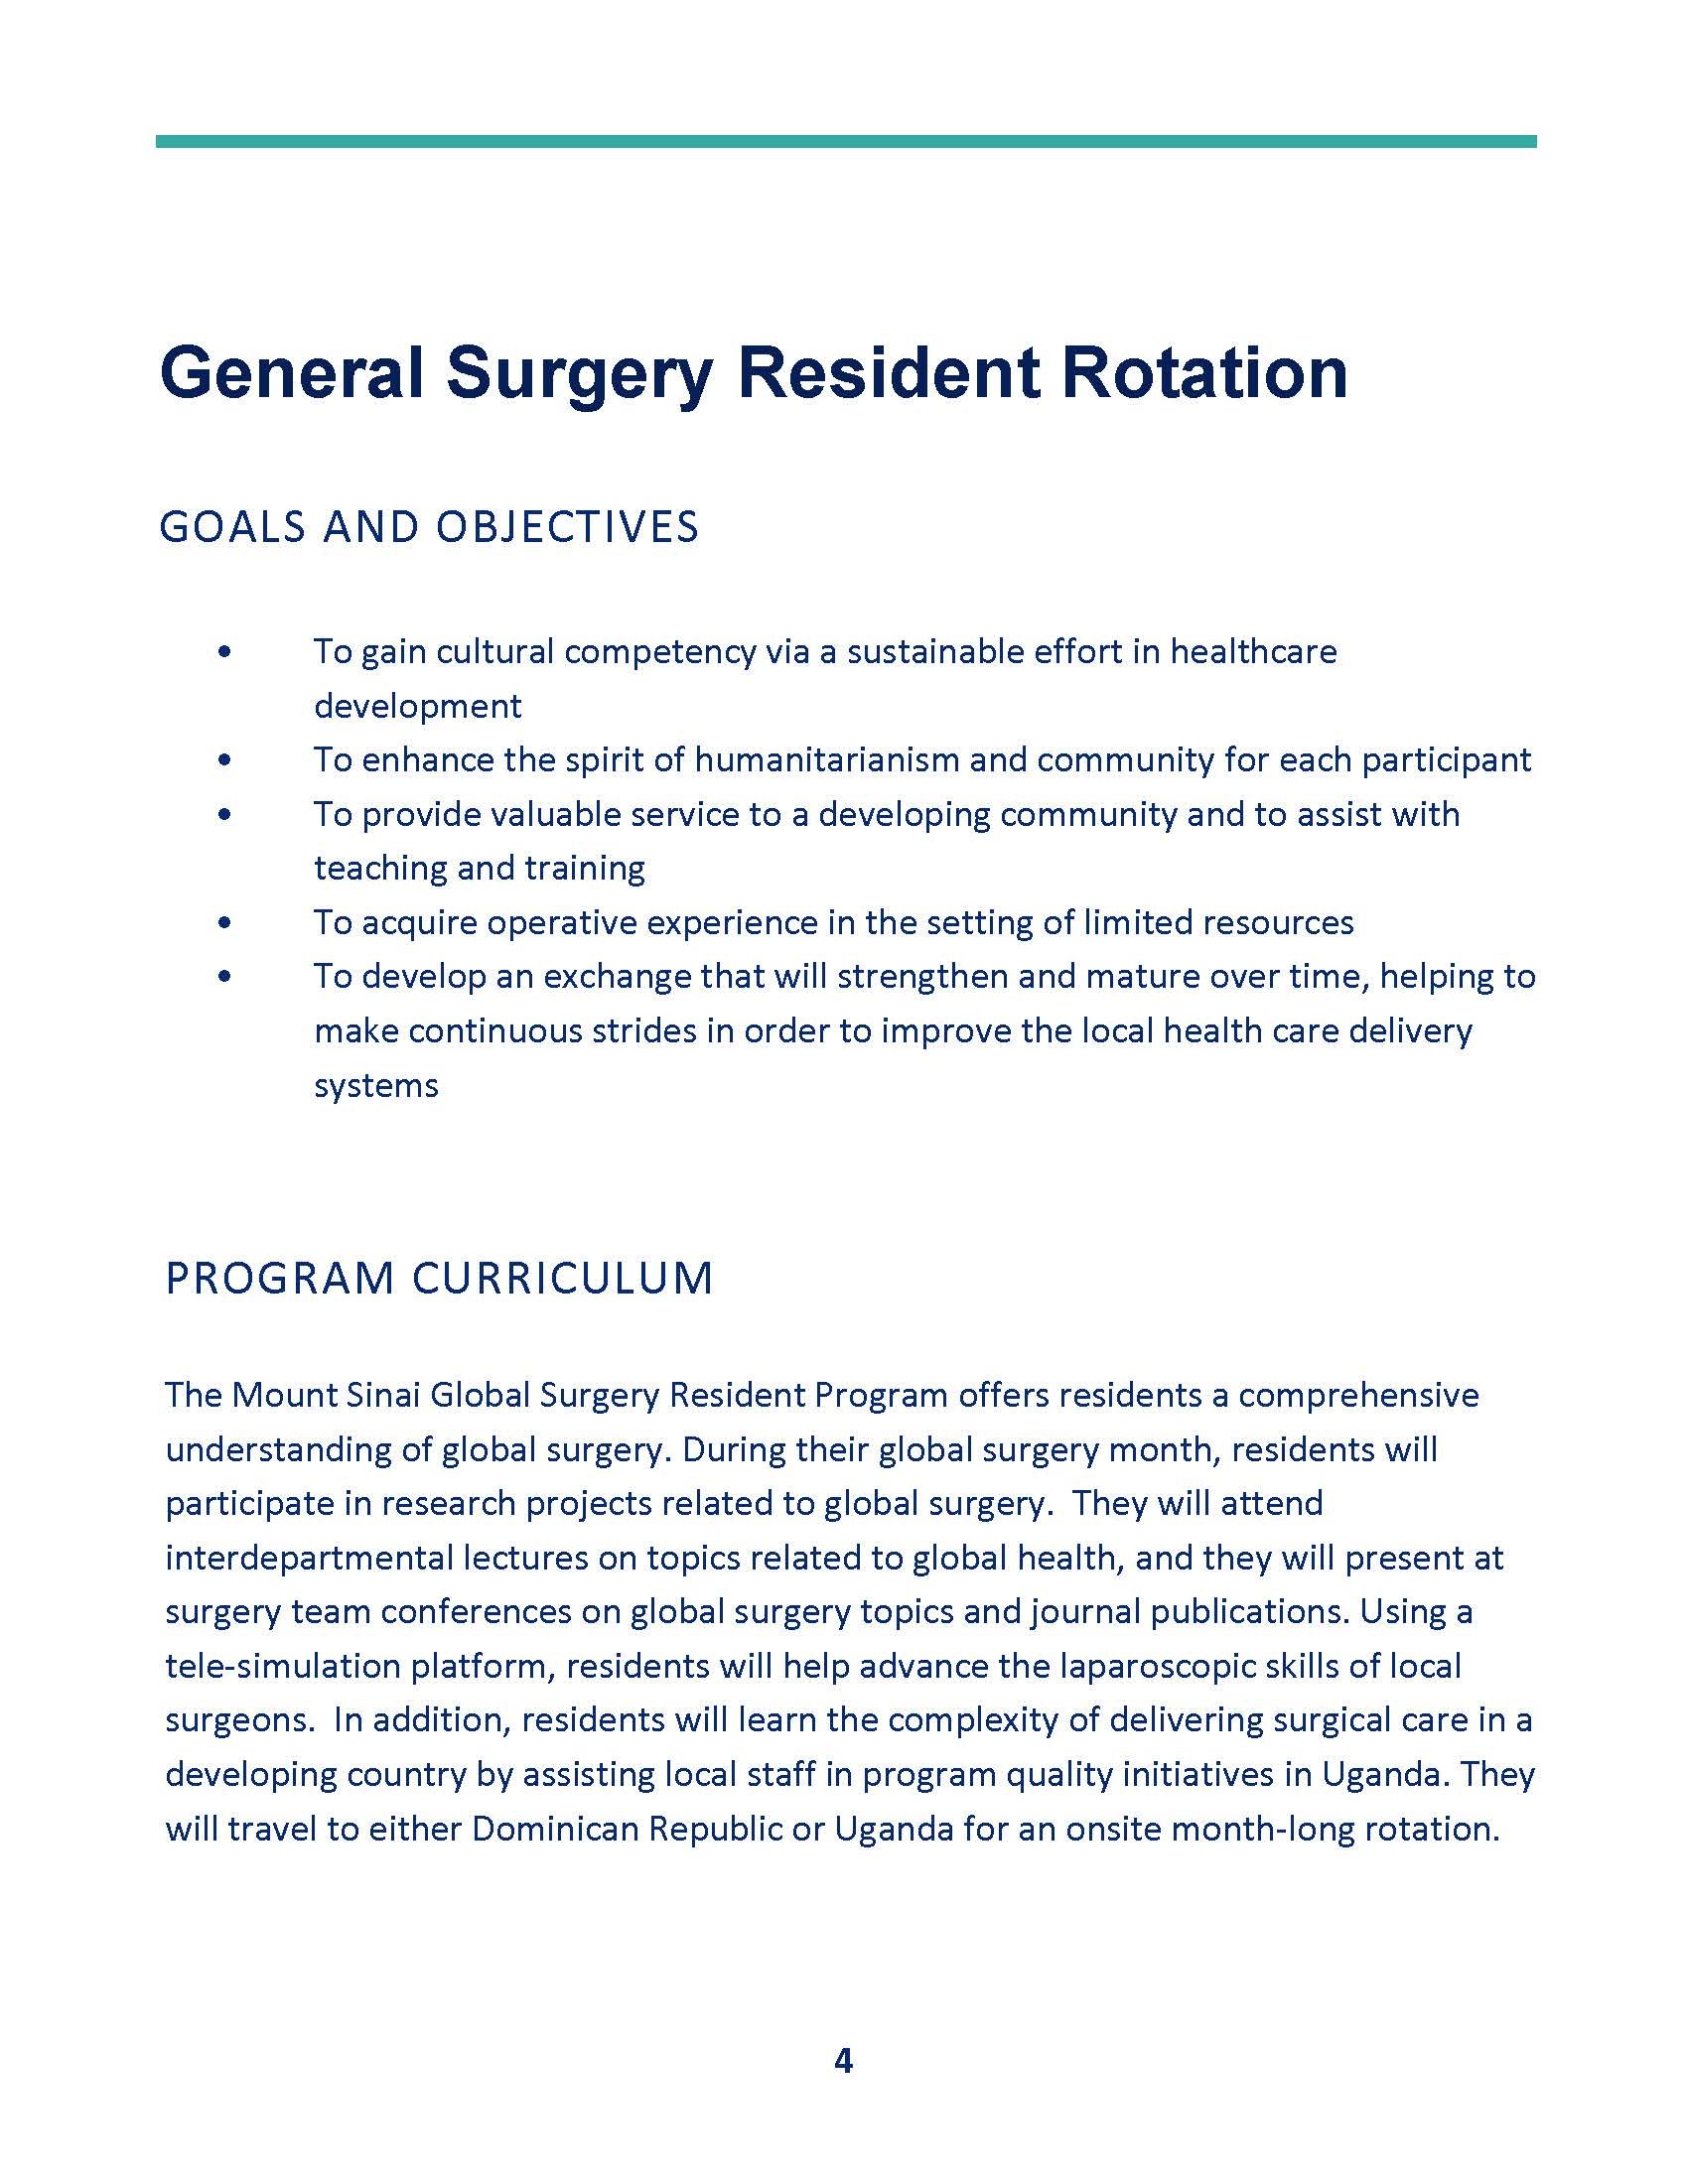 Global surgery resident rotation curriculum 5_9_22_Page_04.jpg